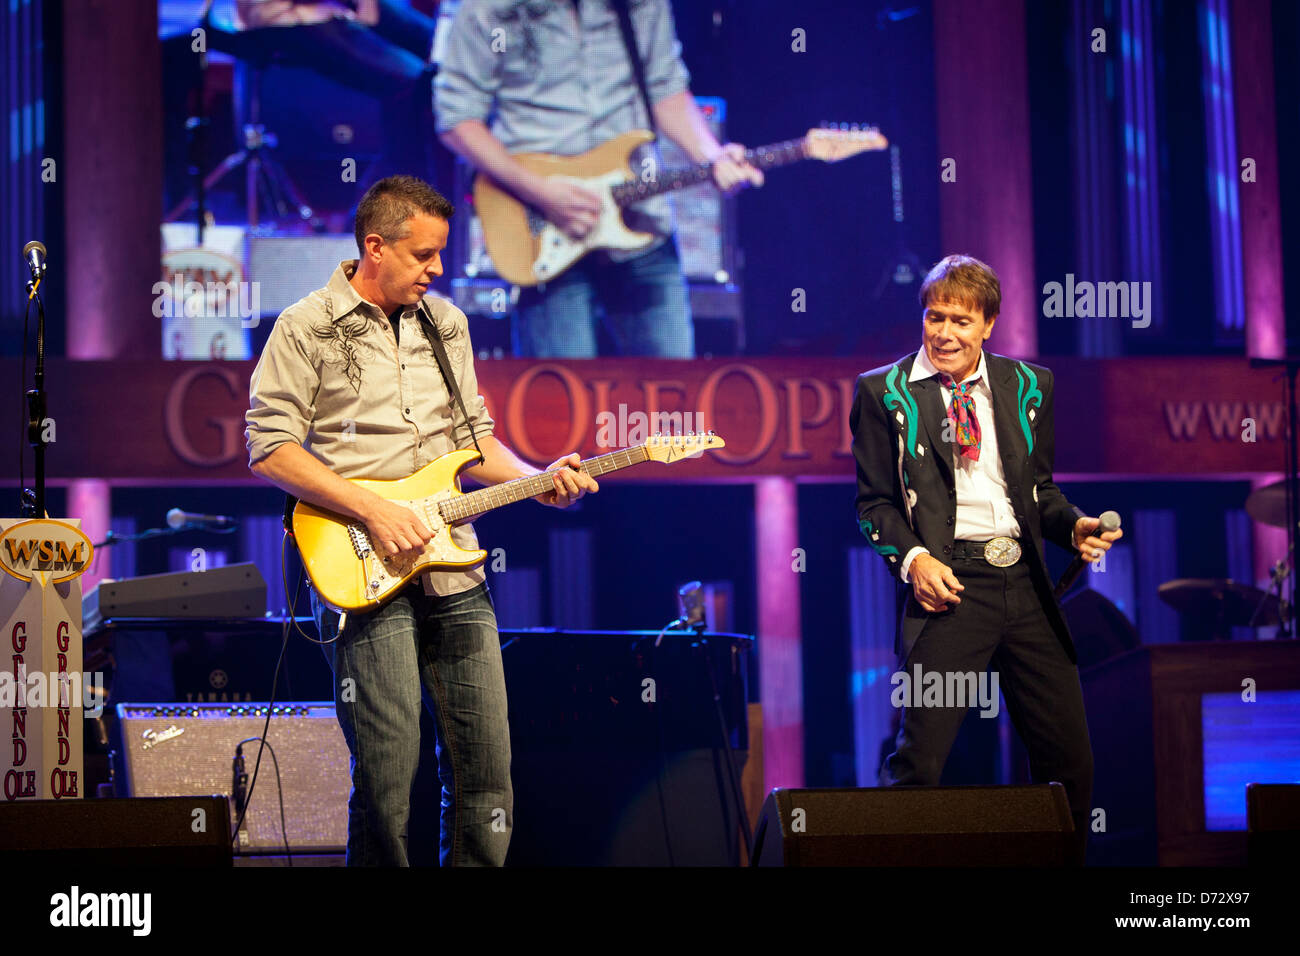 Sir Cliff Richard performs with guitarist Steve Mandile at the Grand Ole Opry, Nashville Tennessee, USA Stock Photo